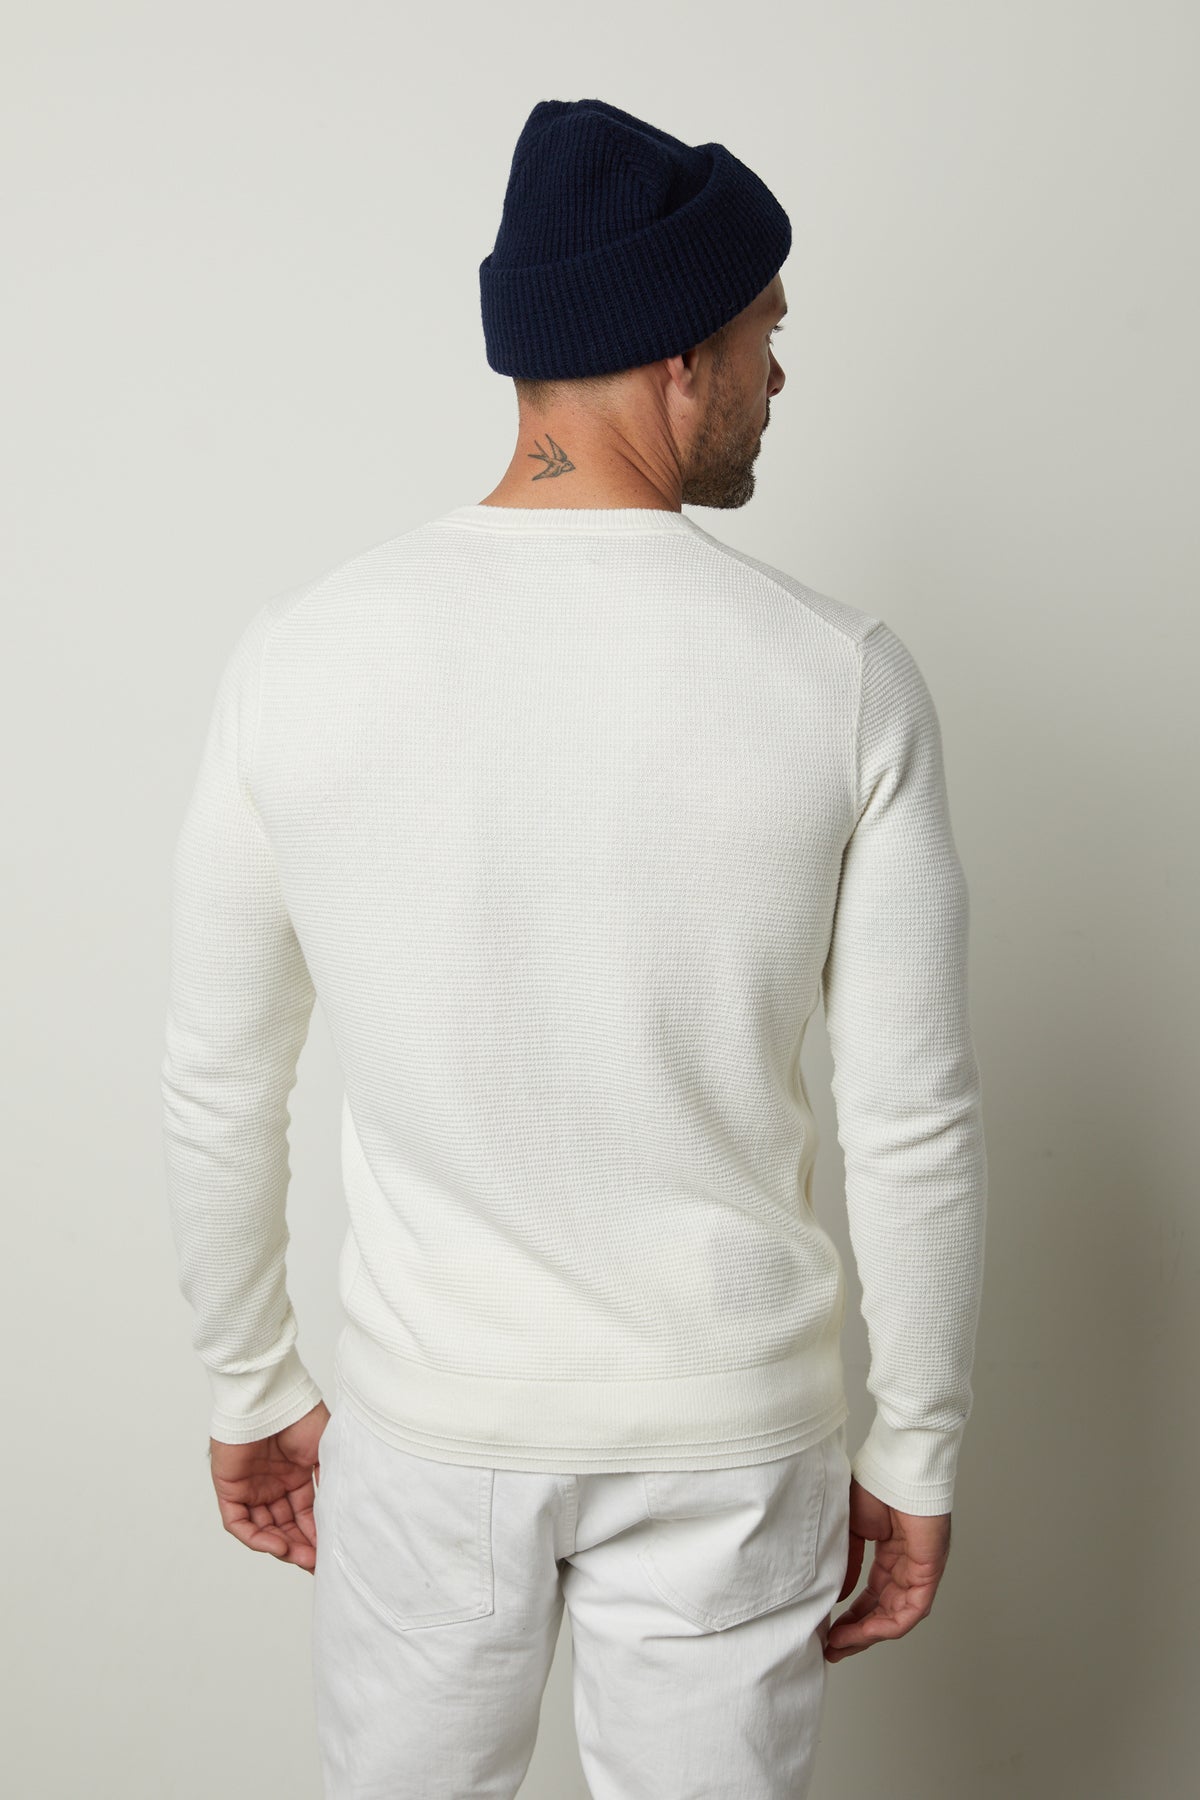 The back view of a man wearing a Velvet by Graham & Spencer WALTER CREW NECK SWEATER and jeans.-26846174478529